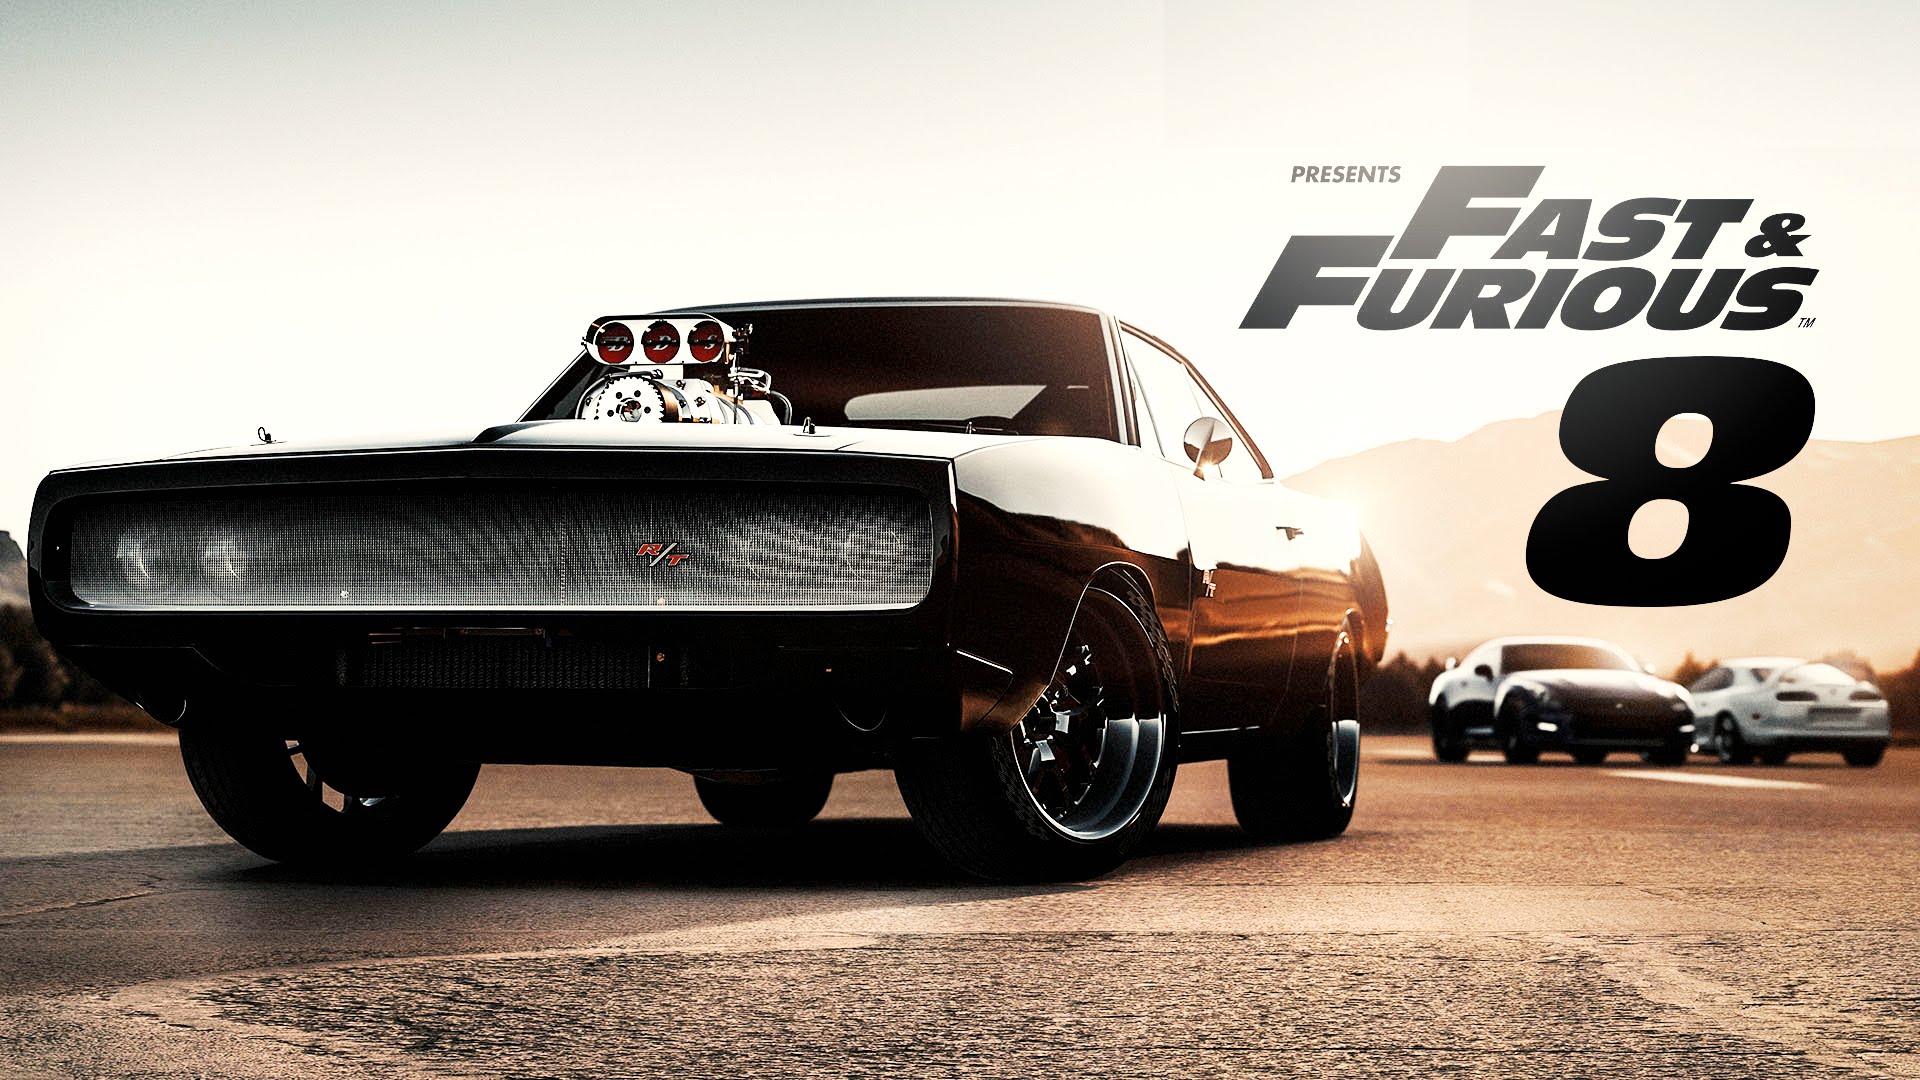 Fast & Furious 8 – The Fate of the Furious: pubblicato il primo teaser trailer